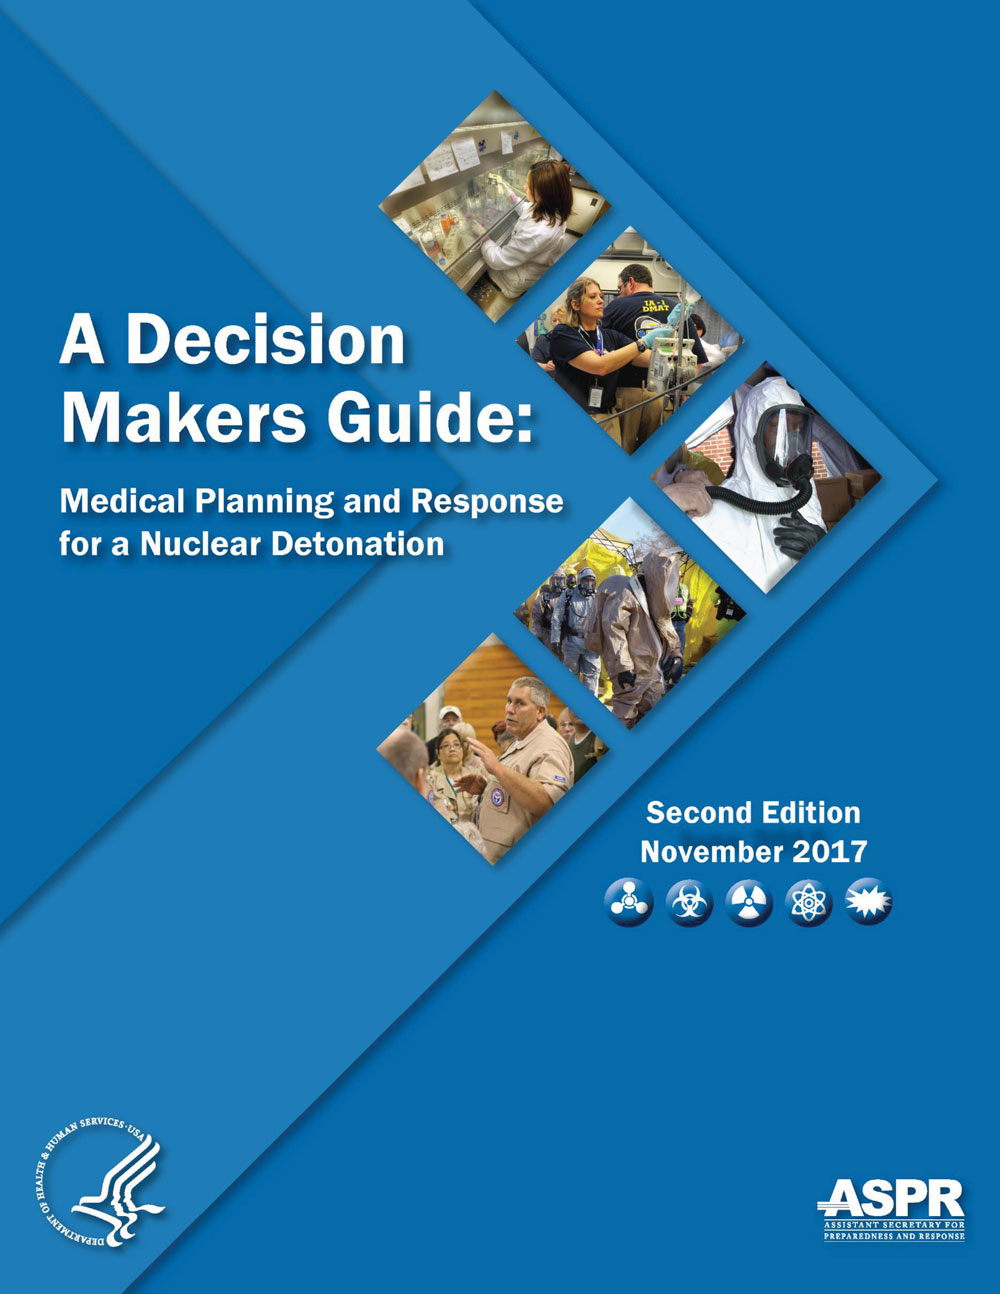 A Decision Makers Guide: Medical Planning and Response for a Nuclear Detonation, report cover